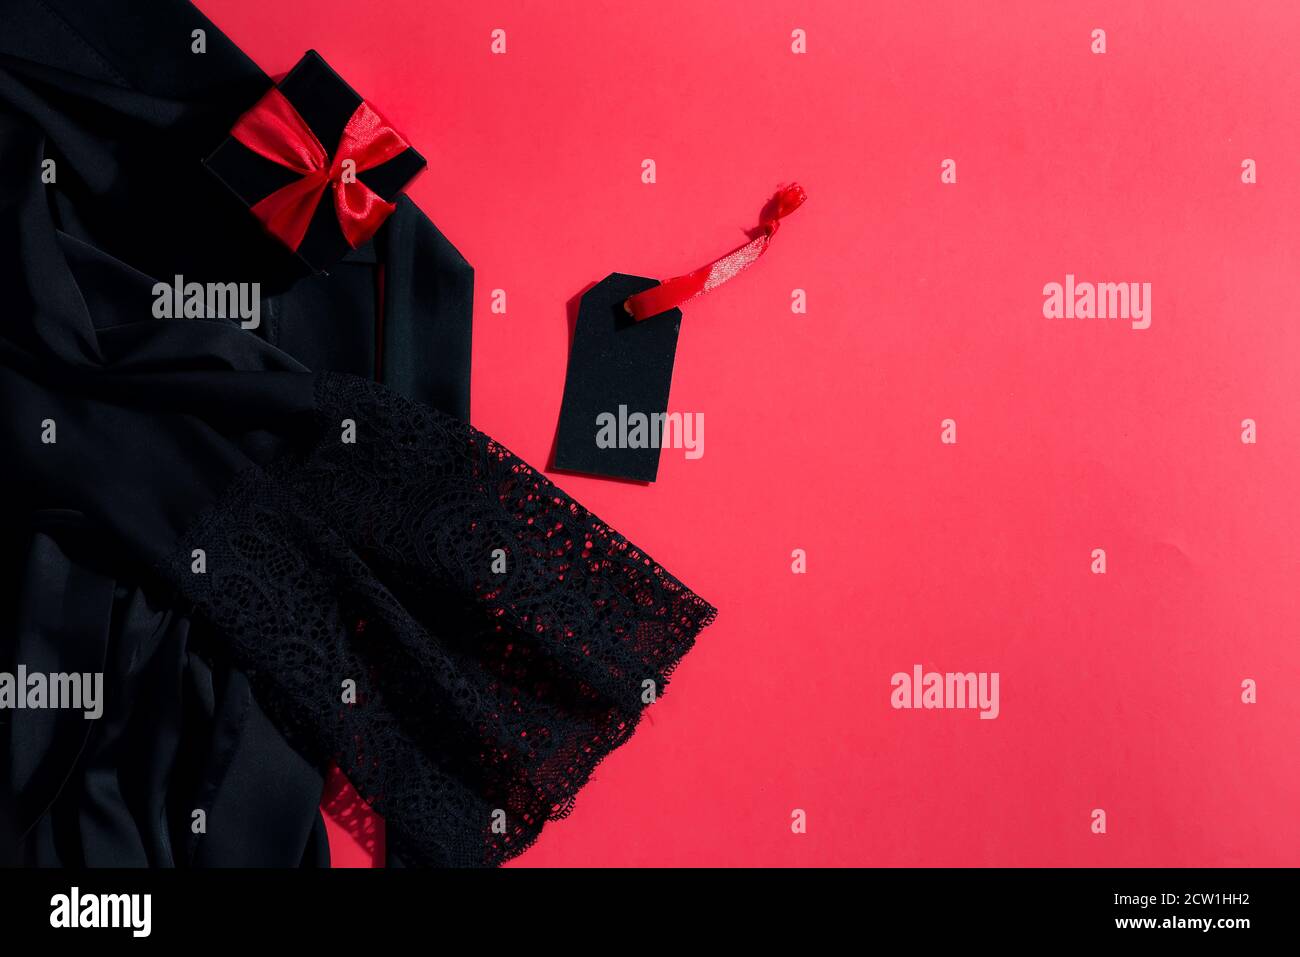 Purchased things - black new woman's clothes, present box and price tag on light coral background, copy space. Top view. Black Friday Sale concept. Stock Photo